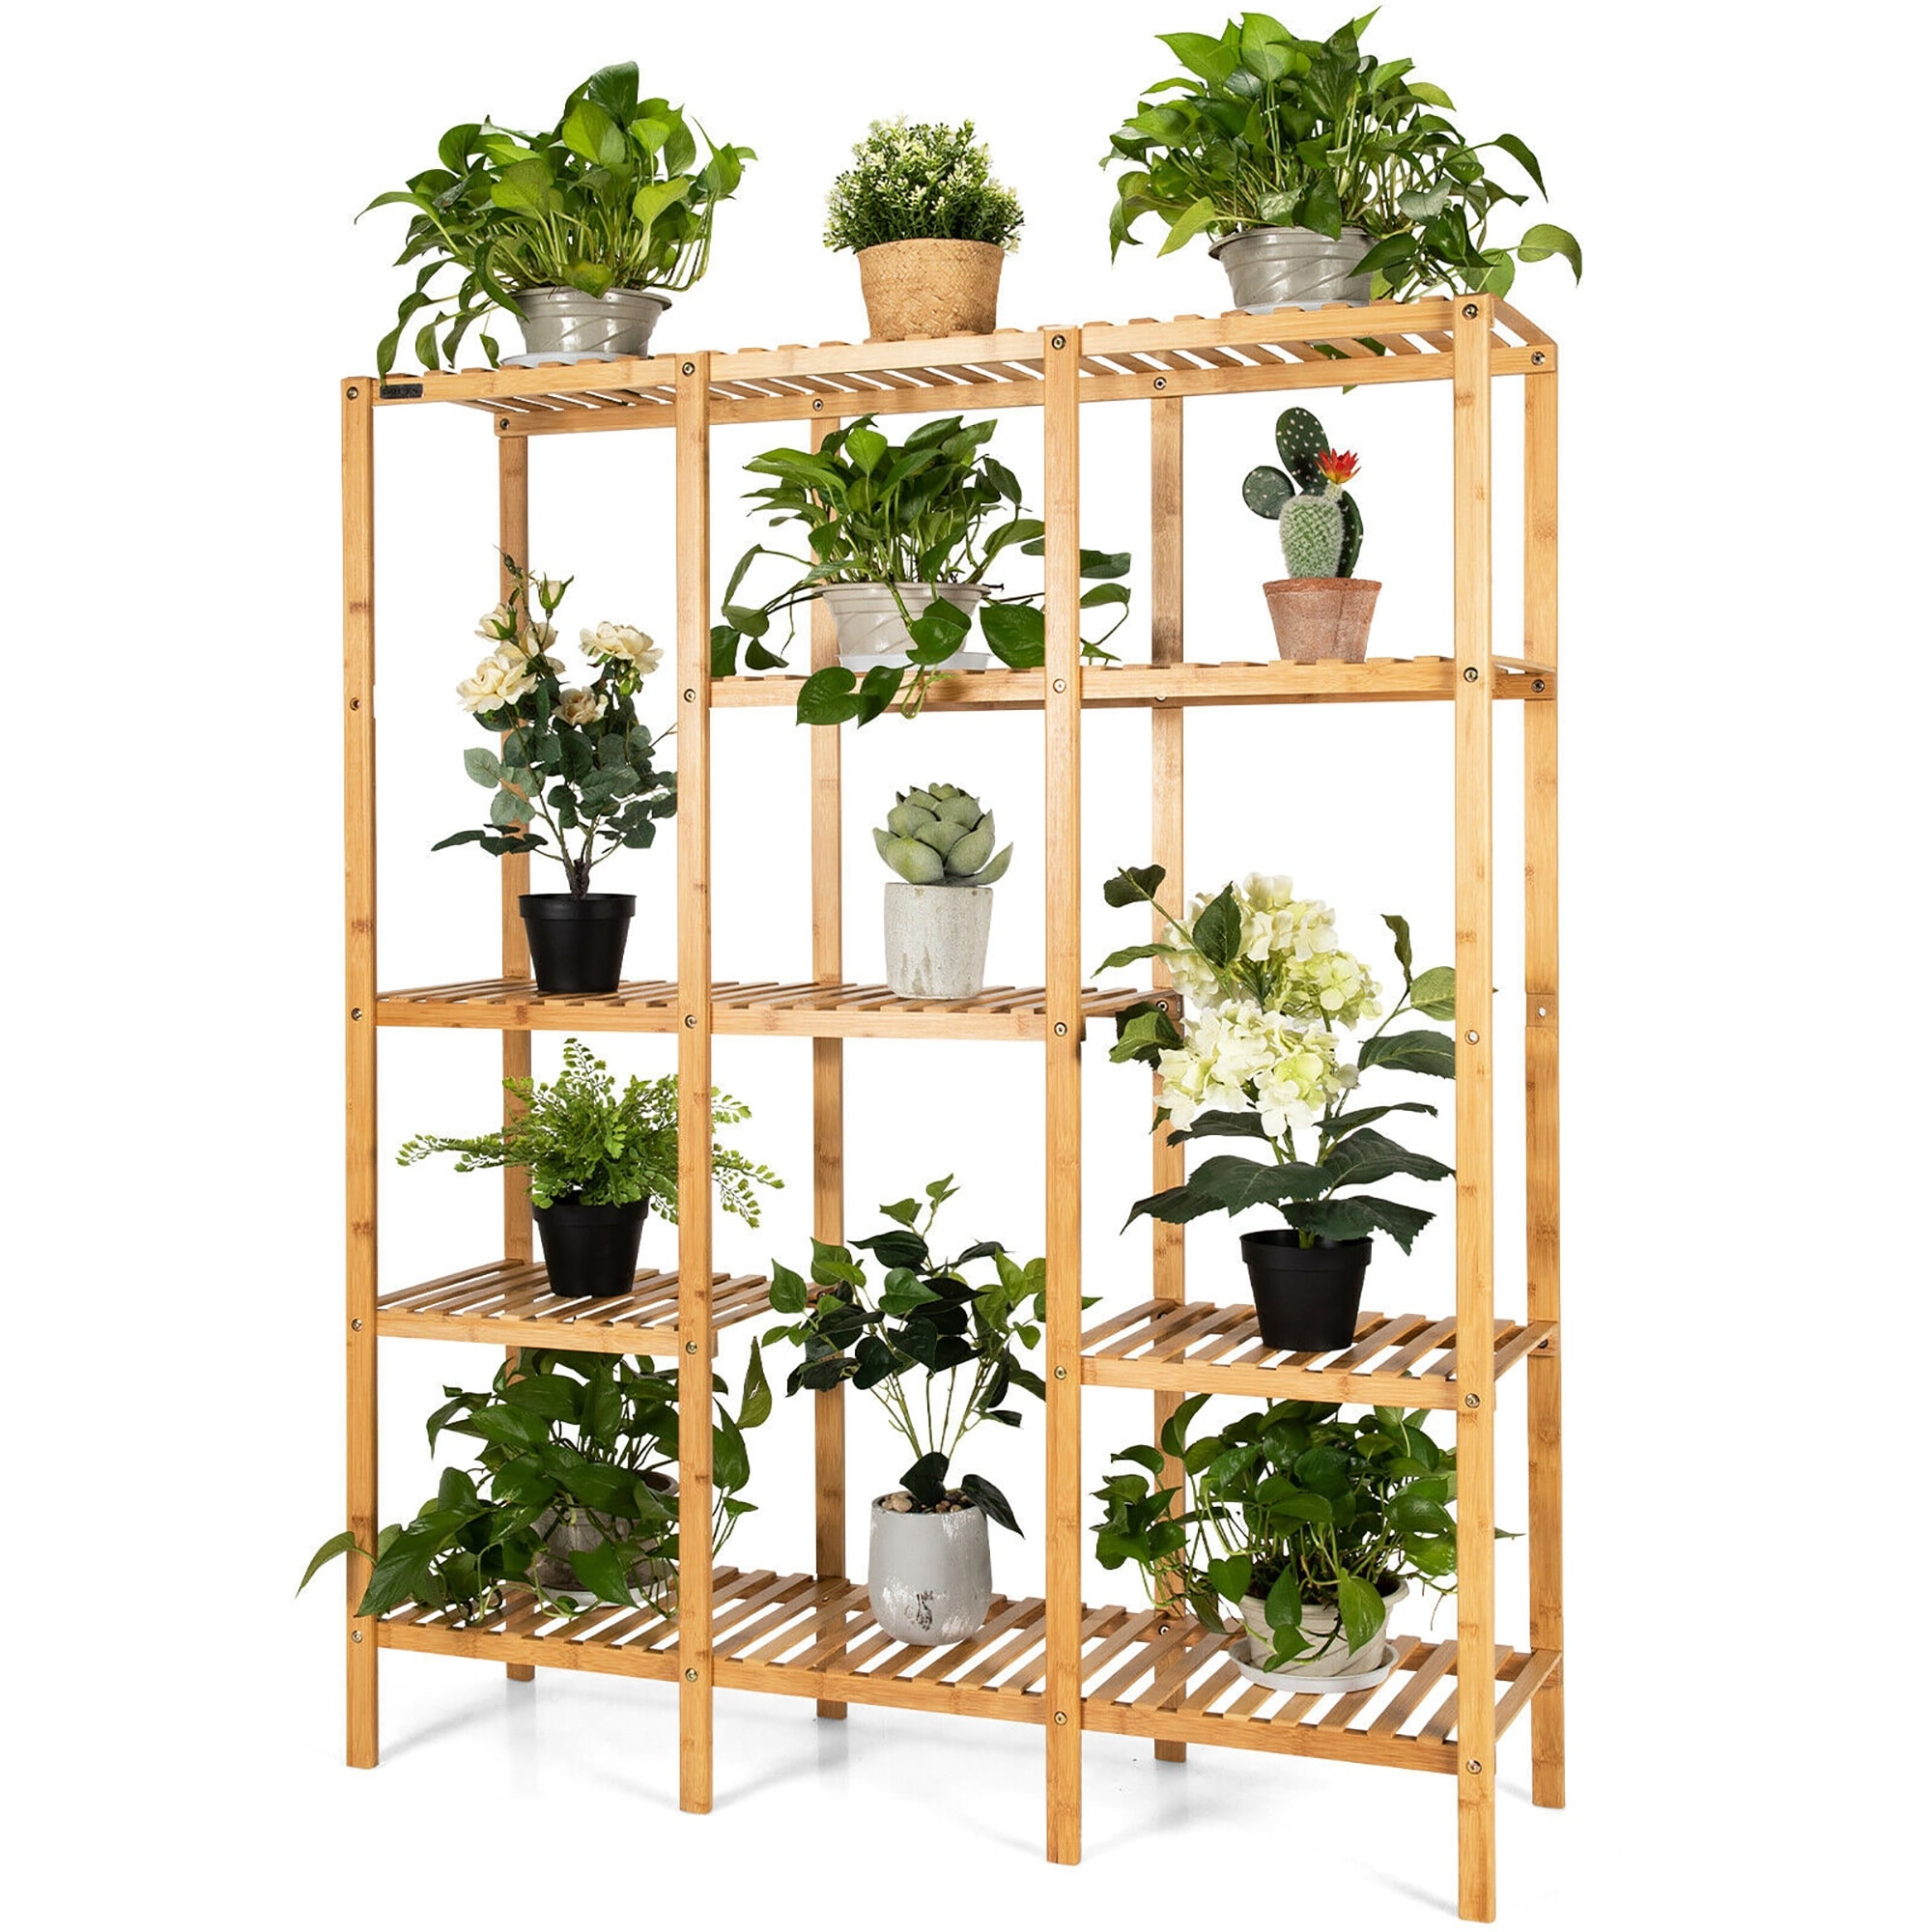 https://ak1.ostkcdn.com/images/products/is/images/direct/1835fca95774619a001aa95e367a36e202f95eec/Multifunctional-Bamboo-Shelf-Storage-Organizer-Rack-Plant-Stand.jpg